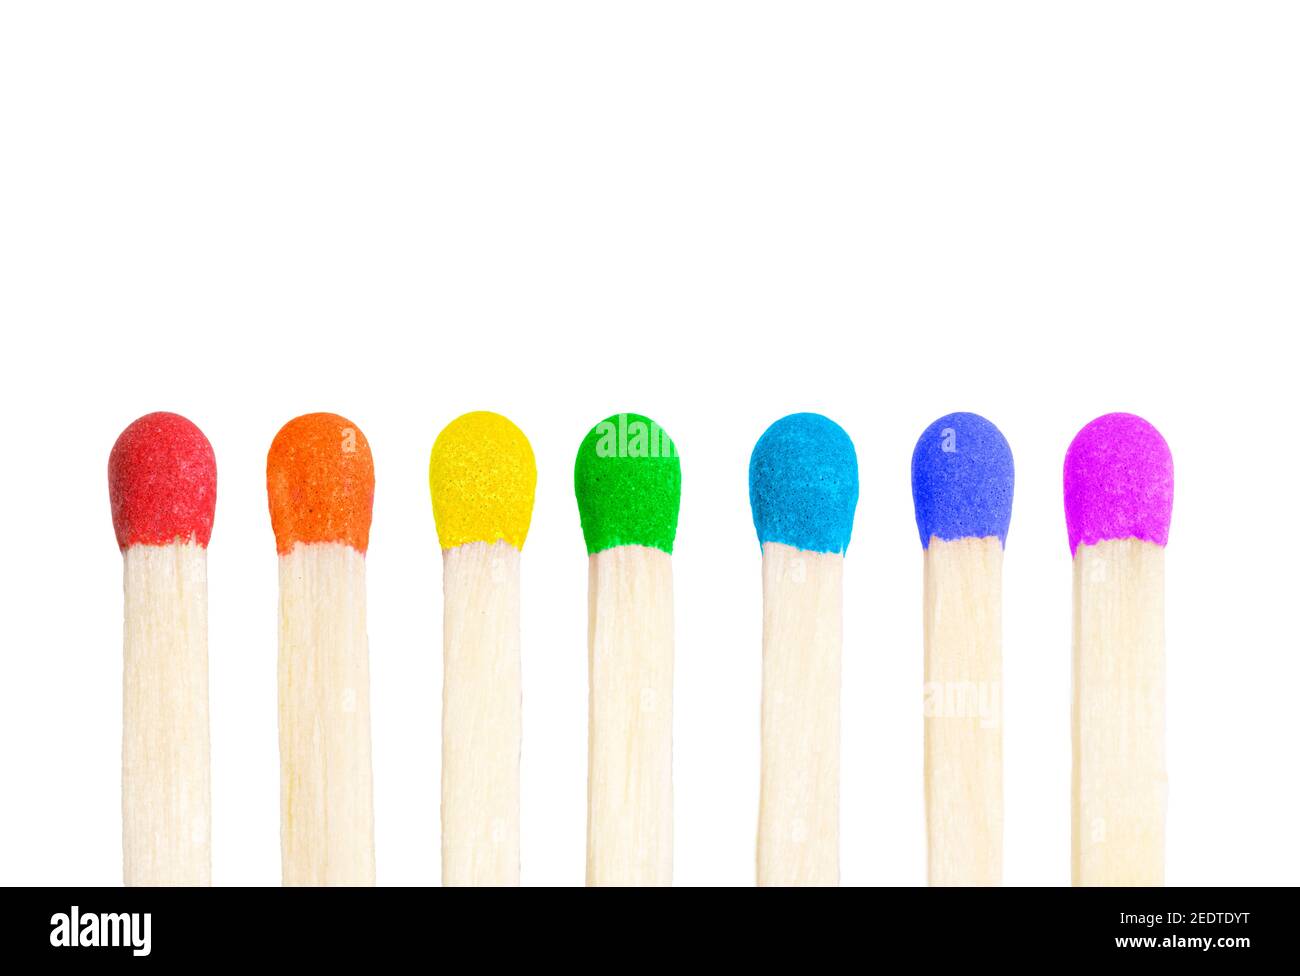 Vertical row of seven matches with match heads painted in rainbow colors isolated on white background. Stock Photo